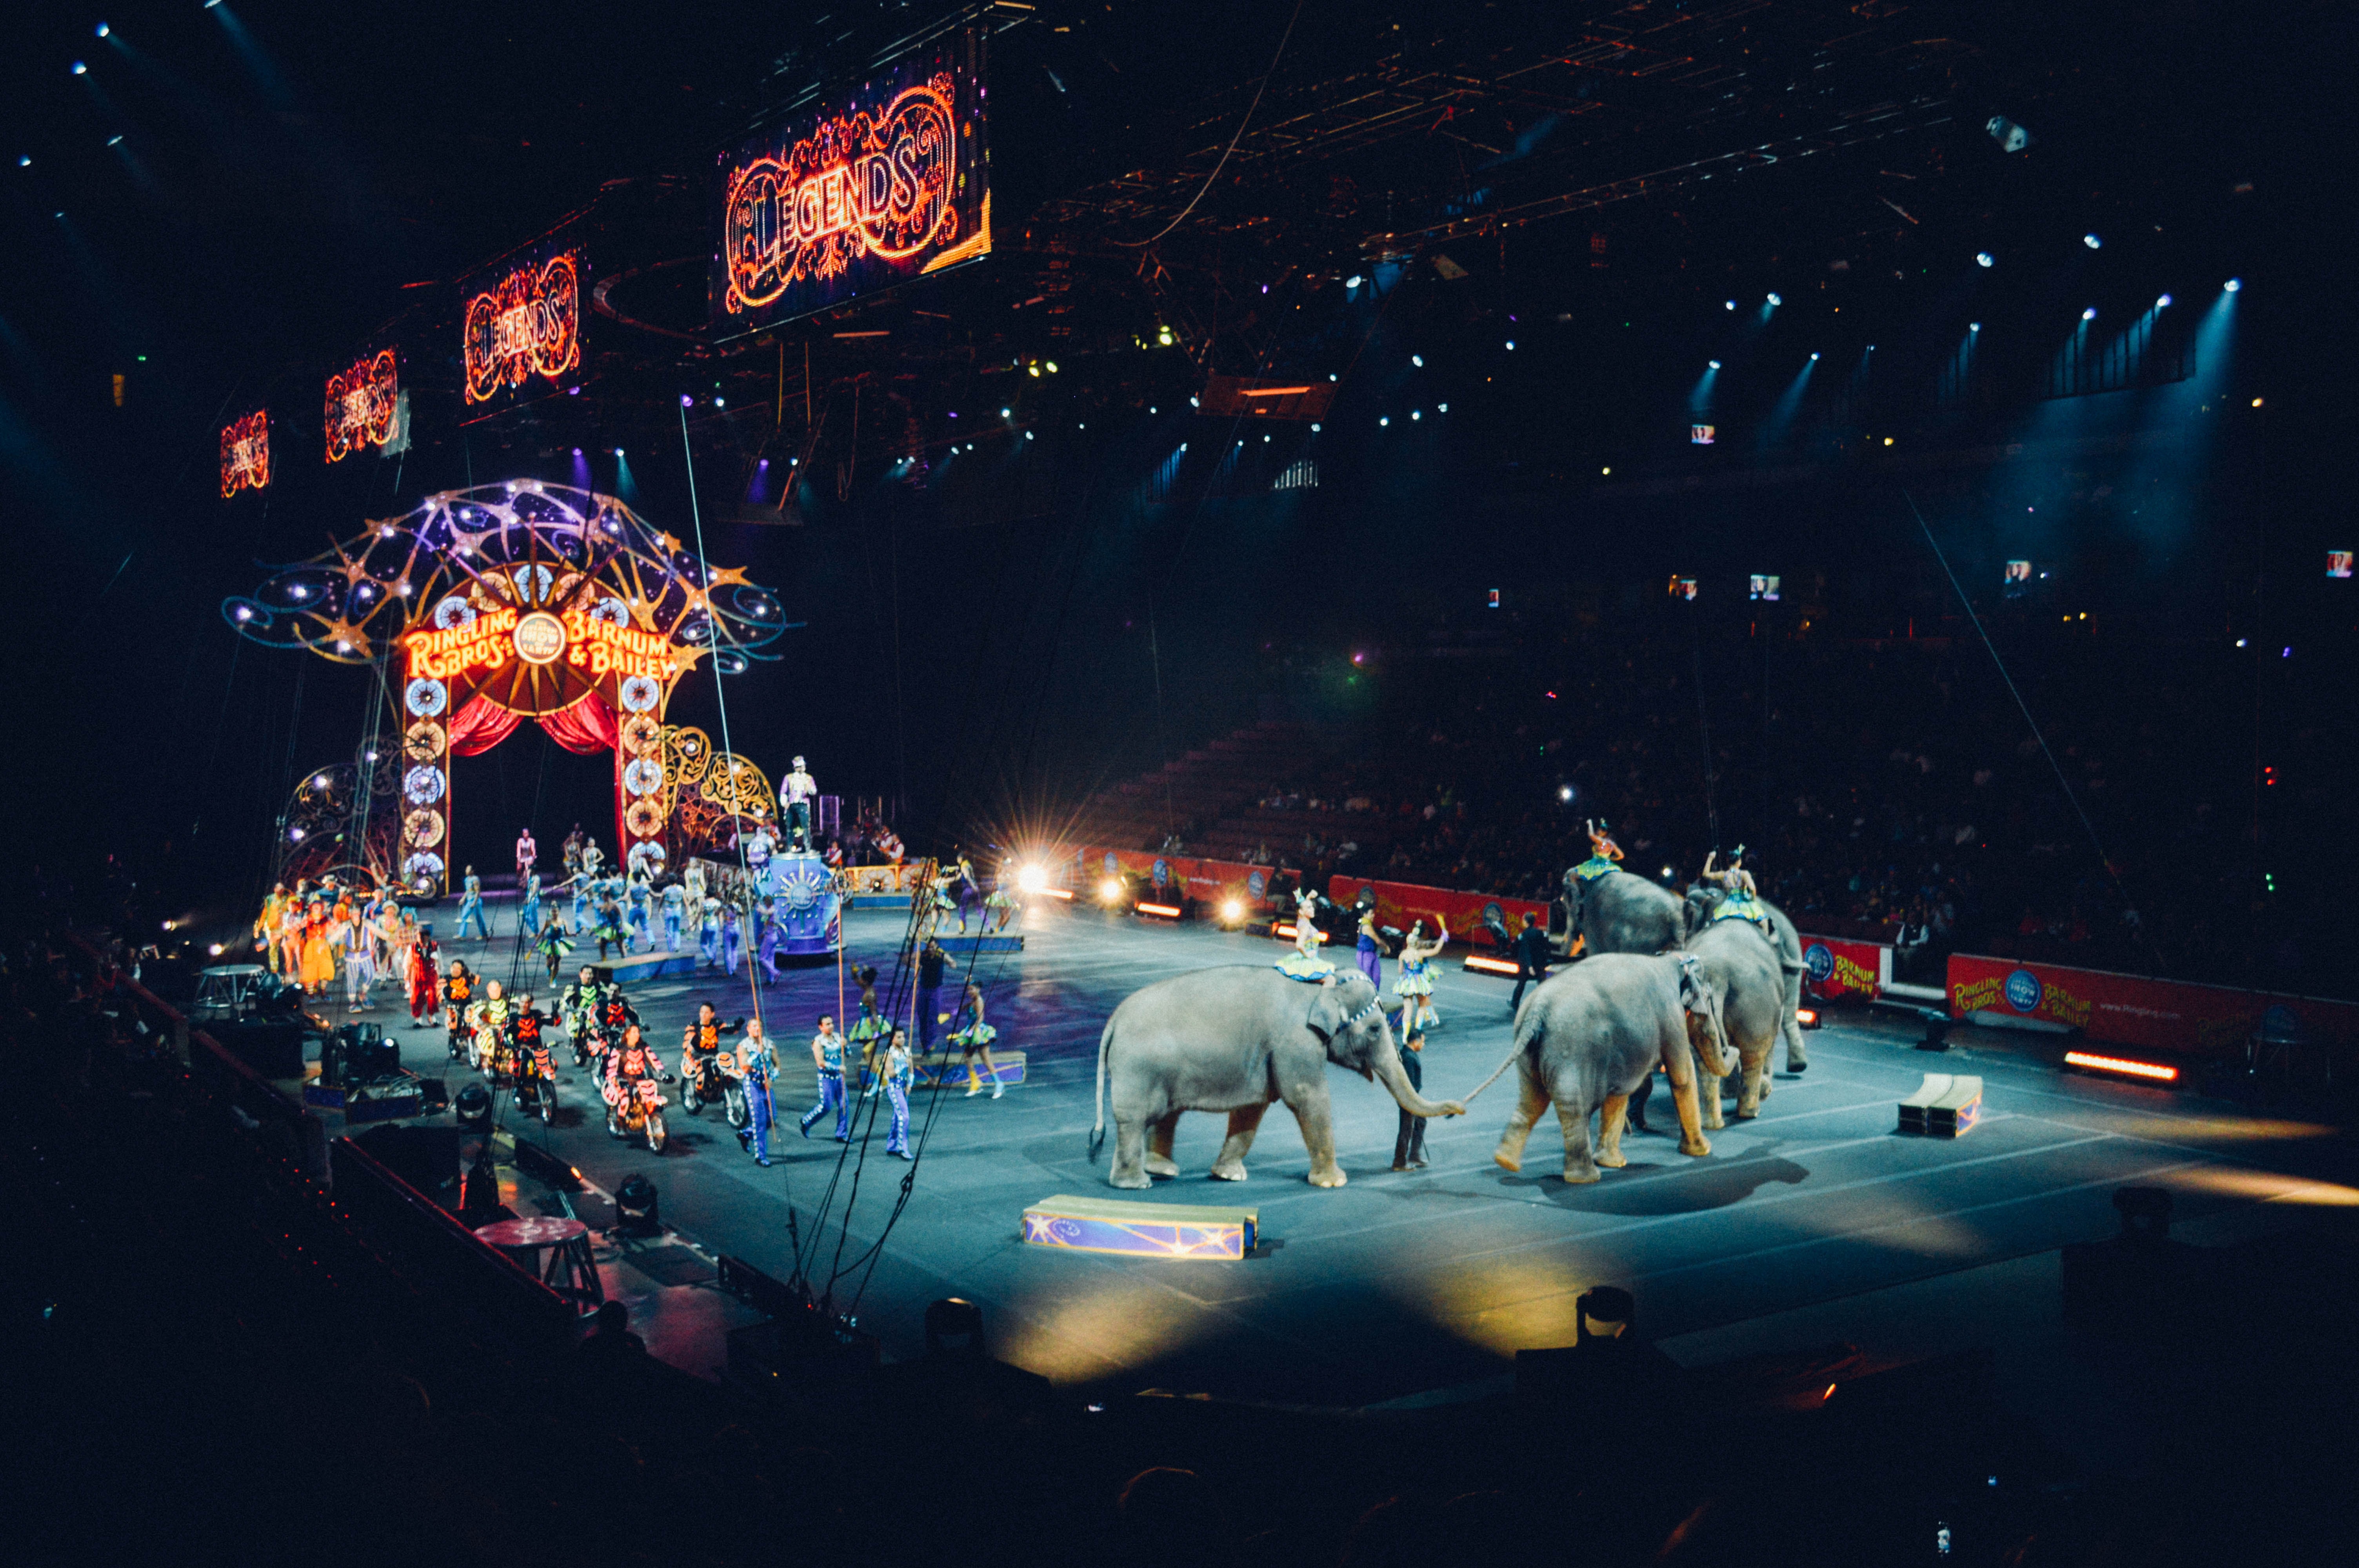 Elephants Performing in Circus